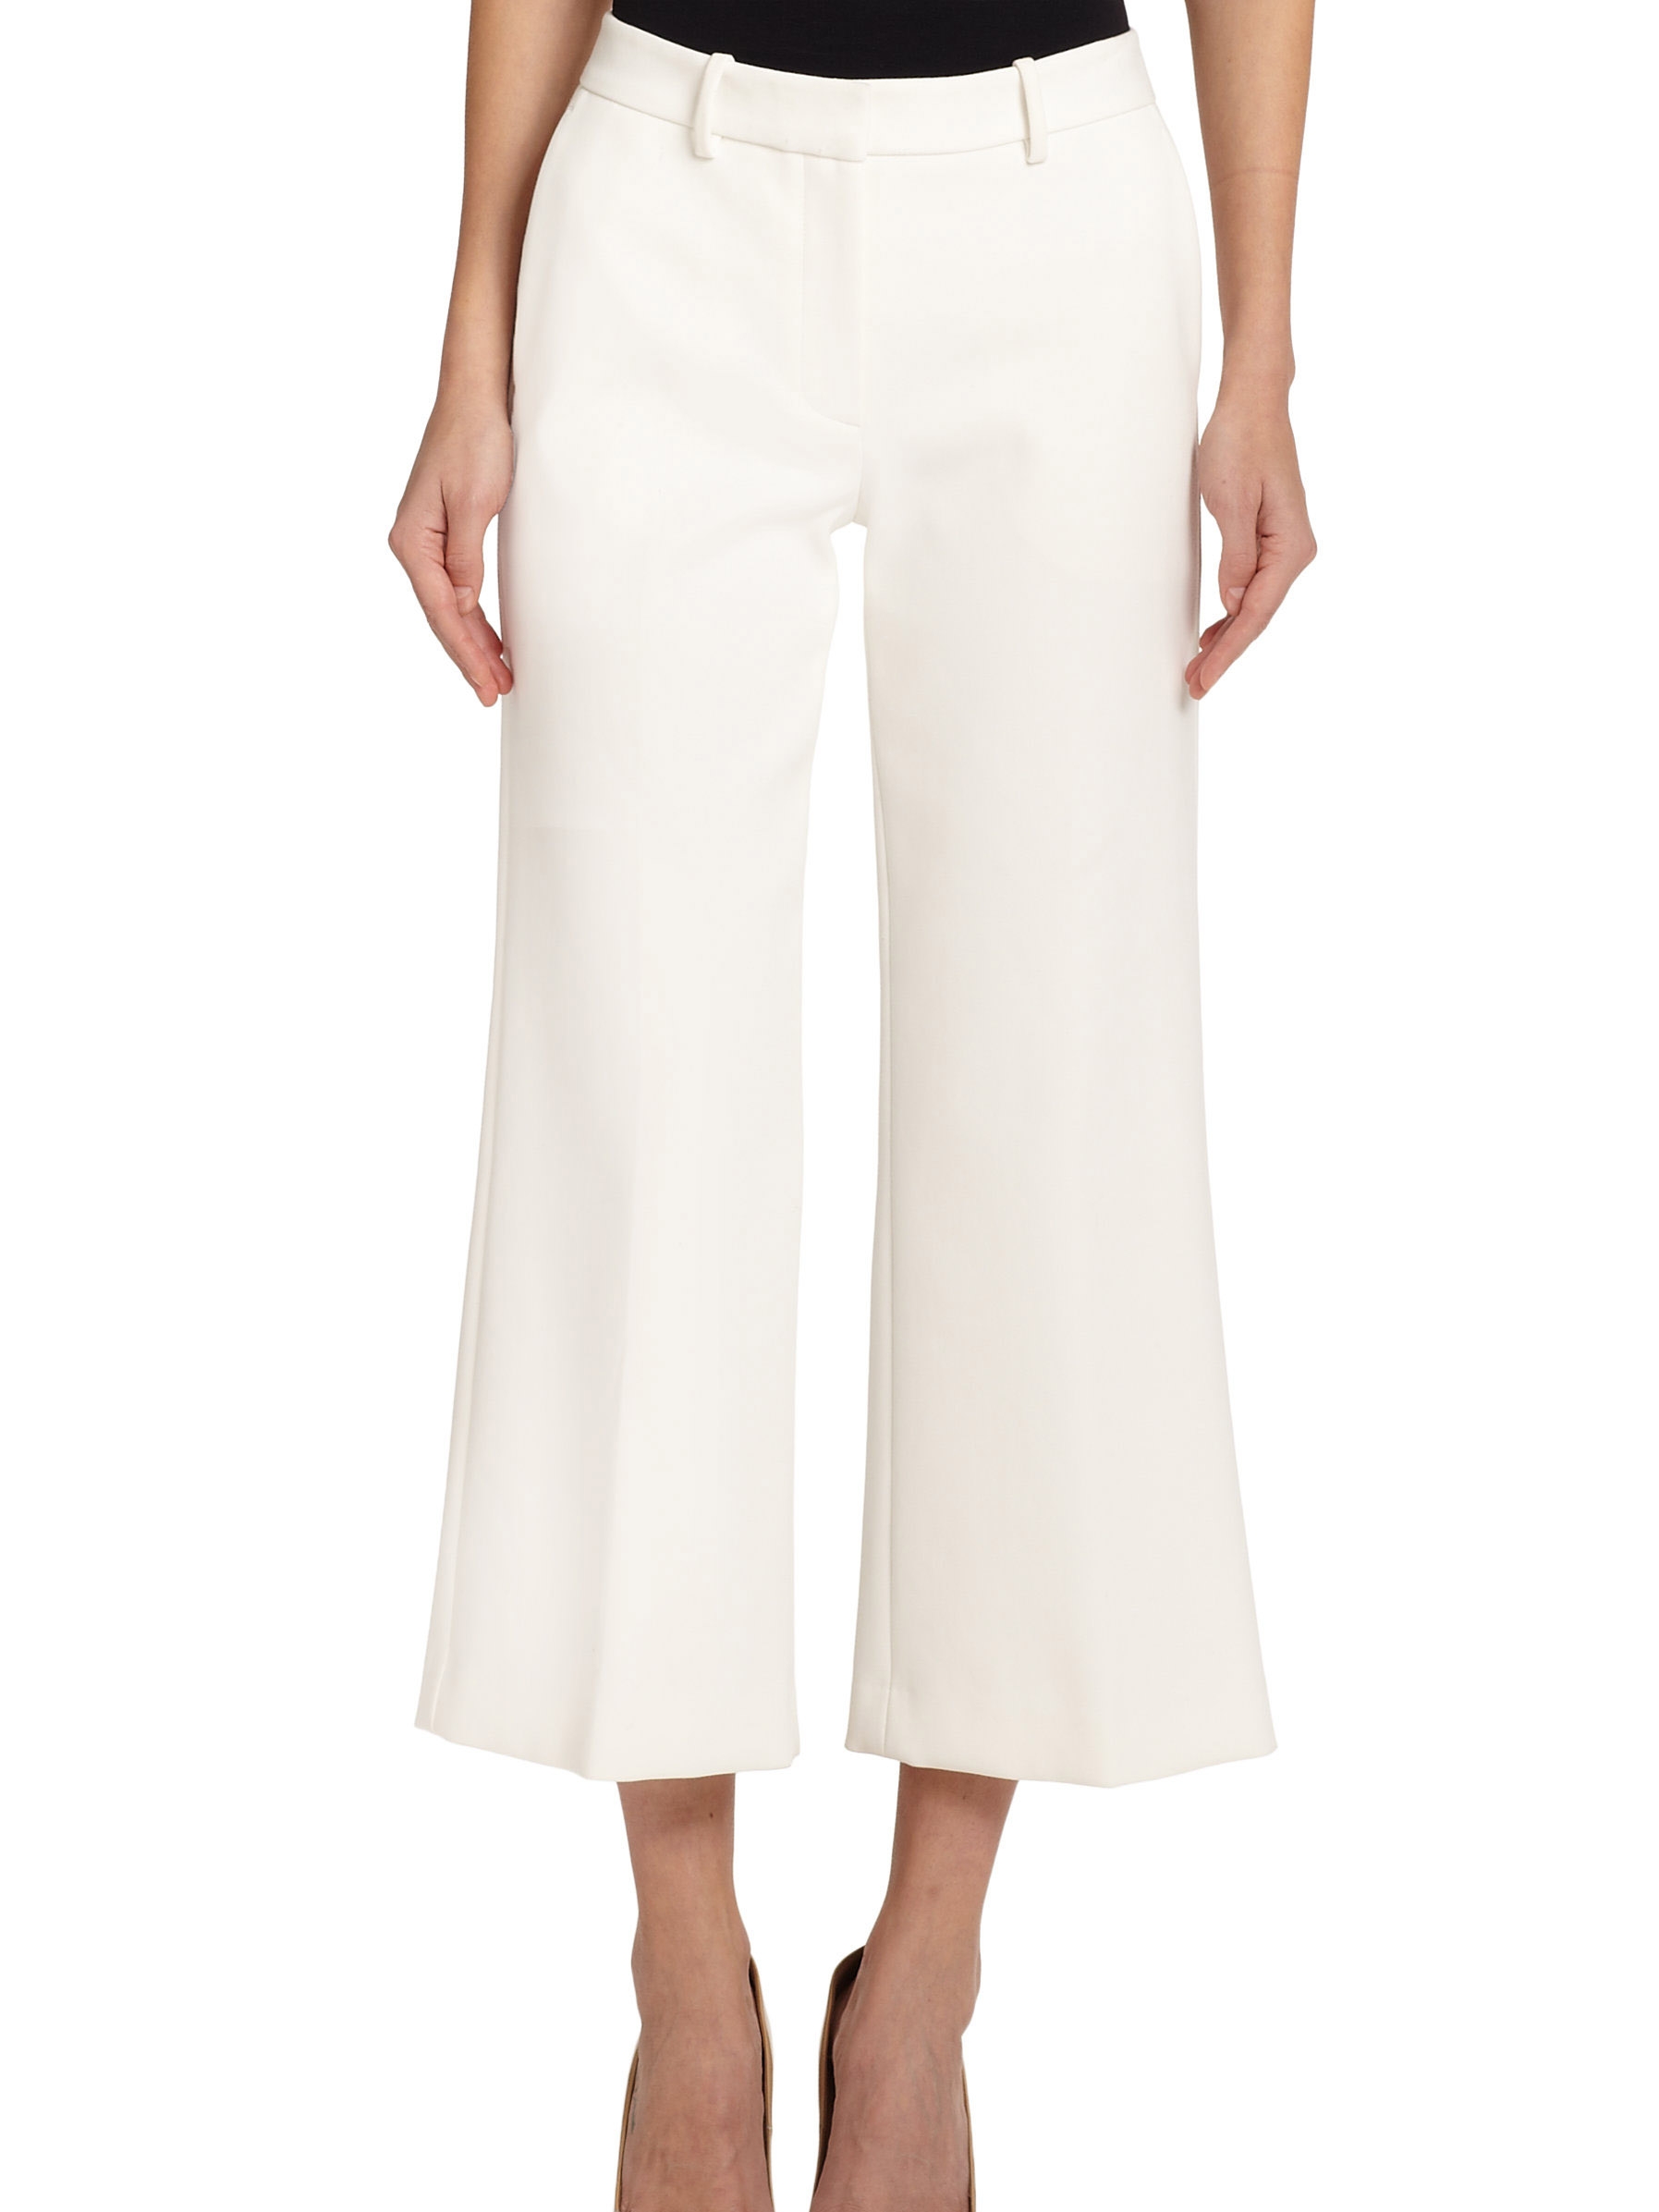 Louise Paris - THEORY SPRINZA Ivory white crepe cropped pants Size 36